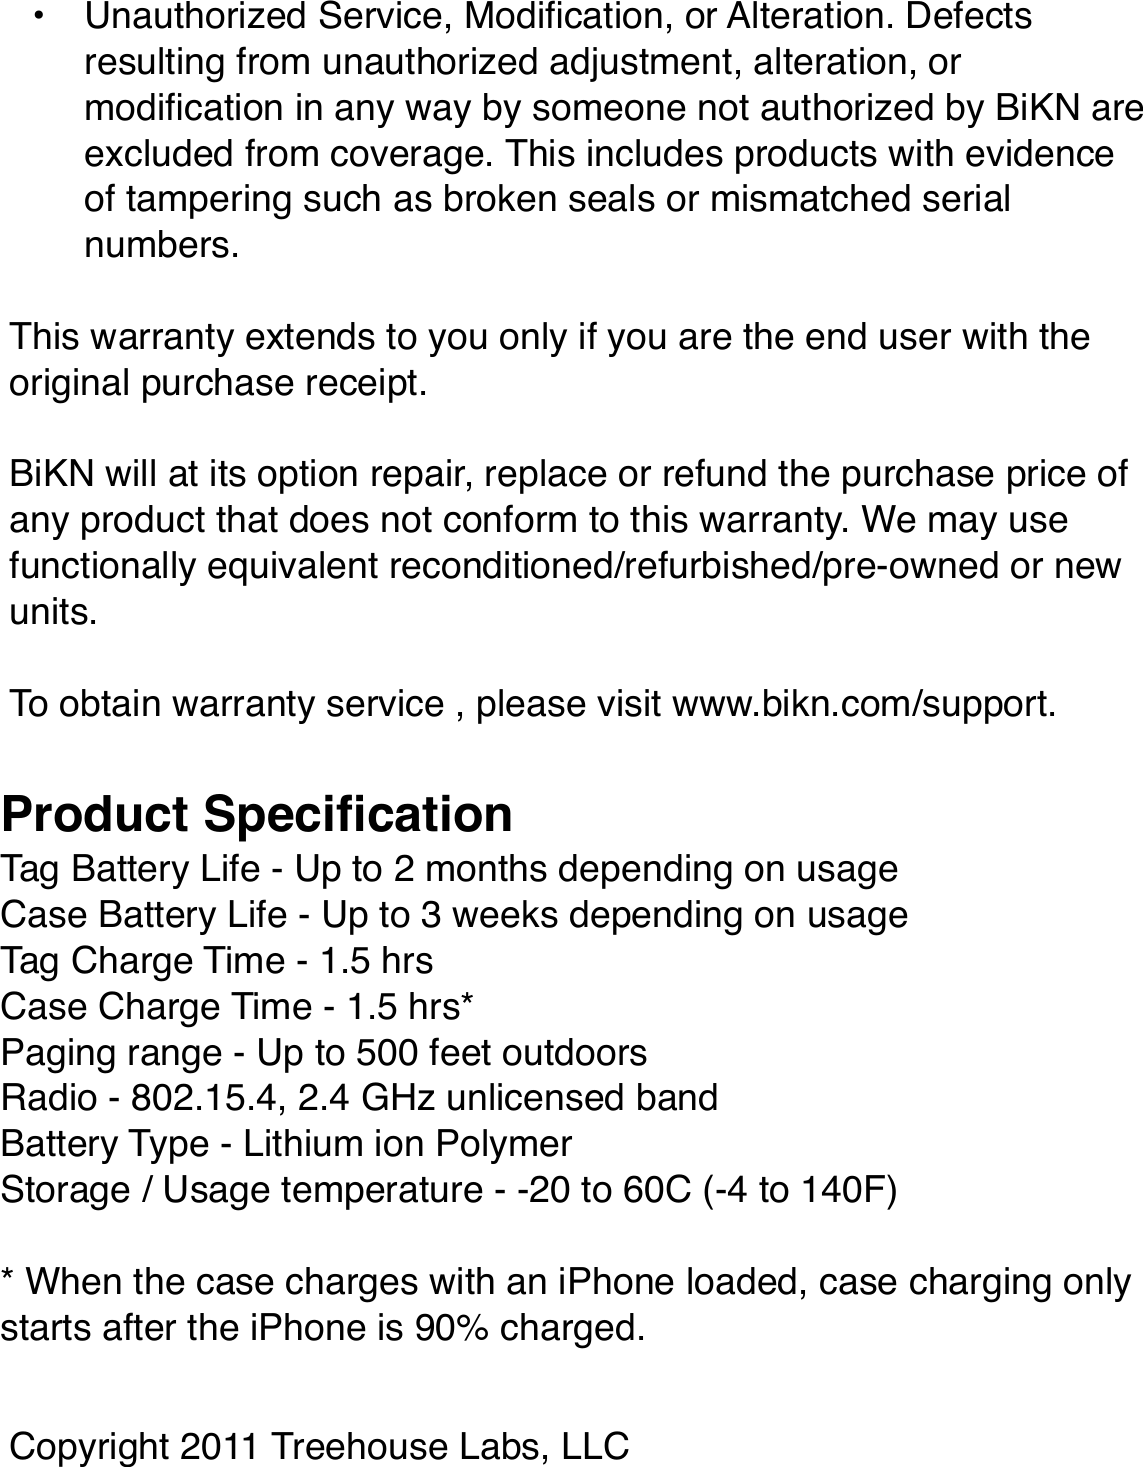 Battery Use• Do not store or use BiKN tags or cases at temperatures below -20 degrees C (-4 F) or above 60 degrees C (140 F).• Do not open or mutilate the battery.• Storing fully charged BiKN tags or cases at high temperatures may permanently reduce battery life.• Only charge with USB-compliant power sources between ChildrenBiKN is not a toy. Care must be used when attaching to very small children to ensure they do not choke on the tag cap.Care• If the device overheats or has been fully dropped into water, please discontinue use and contact BiKN.• Prevent excessive moisture from coming into contact with the product.• Keep Bikn away from open ﬂames like cooking burners. The battery could explode when in contact with ﬁre.Device Disposal and Recycling.Please do not dispose of BiKN devices in a ﬁre or with your household waste. These items should be disposed of in accordance to your local recycling rules, so please contact your local recycling center for information on proper disposal. Or you may return unwanted devices to BiKN using the procedures found at www.bikn.com/support.Software Copyright NoticeThis product includes software copyrighted by InMotion Software. This software may not be modiﬁed, reverse-engineered, distributed, or reproduced in any manner to the extent allowed by law.FCC Notice to UsersThese devices comply with part 15 of theFCC Rules.Operation is subject to the following two conditions: (1) This device may not cause harmful interference, and (2) this device must accept any interference received, including interference that may cause undesired operation. See 47 CFR Sec. 15.19(3). This equipment has been tested and found to comply with the limits for a Class B digital device, pursuant to part 15 of the FCC Rules. These limits are designed to provide reasonable protection against harmful interference in a residential installation. This equipment generates, uses and can radiate radio frequency energy and, if not installed and used in accordance with the instructions, may cause harmful interference to radio communications. However, there is no guarantee that interference will not occur in a particular installation. If this equipment does cause harmful interference to radio or television reception, which can be determined by turning theequipment off and on, the user is encouraged to try to correct the interference by one or more of the following measures: • Reorient or relocate the receiving antenna.• Increase the separation between the equipment and the receiver.• Connect the equipment to an outlet on a circuit different from that to which the receiver is connected.• Consult the dealer or an experienced radio/TV technician for help.This device and its antenna must not be collocated or operated in conjunction with any other antenna or transmitter other than the Apple iPhone. To comply with FCC RF exposure requirements, only use supplied antenna. Any unauthorized modiﬁcation to the antenna or device could void the userʼs authority to operate this device.BiKN has not approved any changes or modiﬁcations to this device by the user. Any changes or modiﬁcations could void the userʼs authority to operate the equipment. See 47 CFR Sec. 15.21.Warranty.BiKN will warranty the product for the period of 1 year from the time of purchase in the United States from defects in materials and workmanship with the following exclusions:• Normal Wear and Tear. Periodic maintenance, repair and replacement due to normal wear and tear are excluded from coverage.• Abuse and Misuse. Defects or damage that result from improper operation, storage, misuse, physical damage such as cracks and scratches, contact with liquids, extreme humidity, sand dirt, extreme heat or food.• Unauthorized Service, Modiﬁcation, or Alteration. Defects resulting from unauthorized adjustment, alteration, or modiﬁcation in any way by someone not authorized by BiKN are excluded from coverage. This includes products with evidence of tampering such as broken seals or mismatched serial numbers.This warranty extends to you only if you are the end user with the original purchase receipt.BiKN will at its option repair, replace or refund the purchase price of any product that does not conform to this warranty. We may use functionally equivalent reconditioned/refurbished/pre-owned or new units.To obtain warranty service , please visit www.bikn.com/support.Tag Battery Life - Up to 2 months depending on usageCase Battery Life - Up to 3 weeks depending on usageTag Charge Time - 1.5 hrsCase Charge Time - 1.5 hrs*Paging range - Up to 500 feet outdoorsRadio - 802.15.4, 2.4 GHz unlicensed bandBattery Type - Lithium ion PolymerStorage / Usage temperature - -20 to 60C (-4 to 140F)* When the case charges with an iPhone loaded, case charging only starts after the iPhone is 90% charged.Product SpeciﬁcationCopyright 2011 Treehouse Labs, LLC